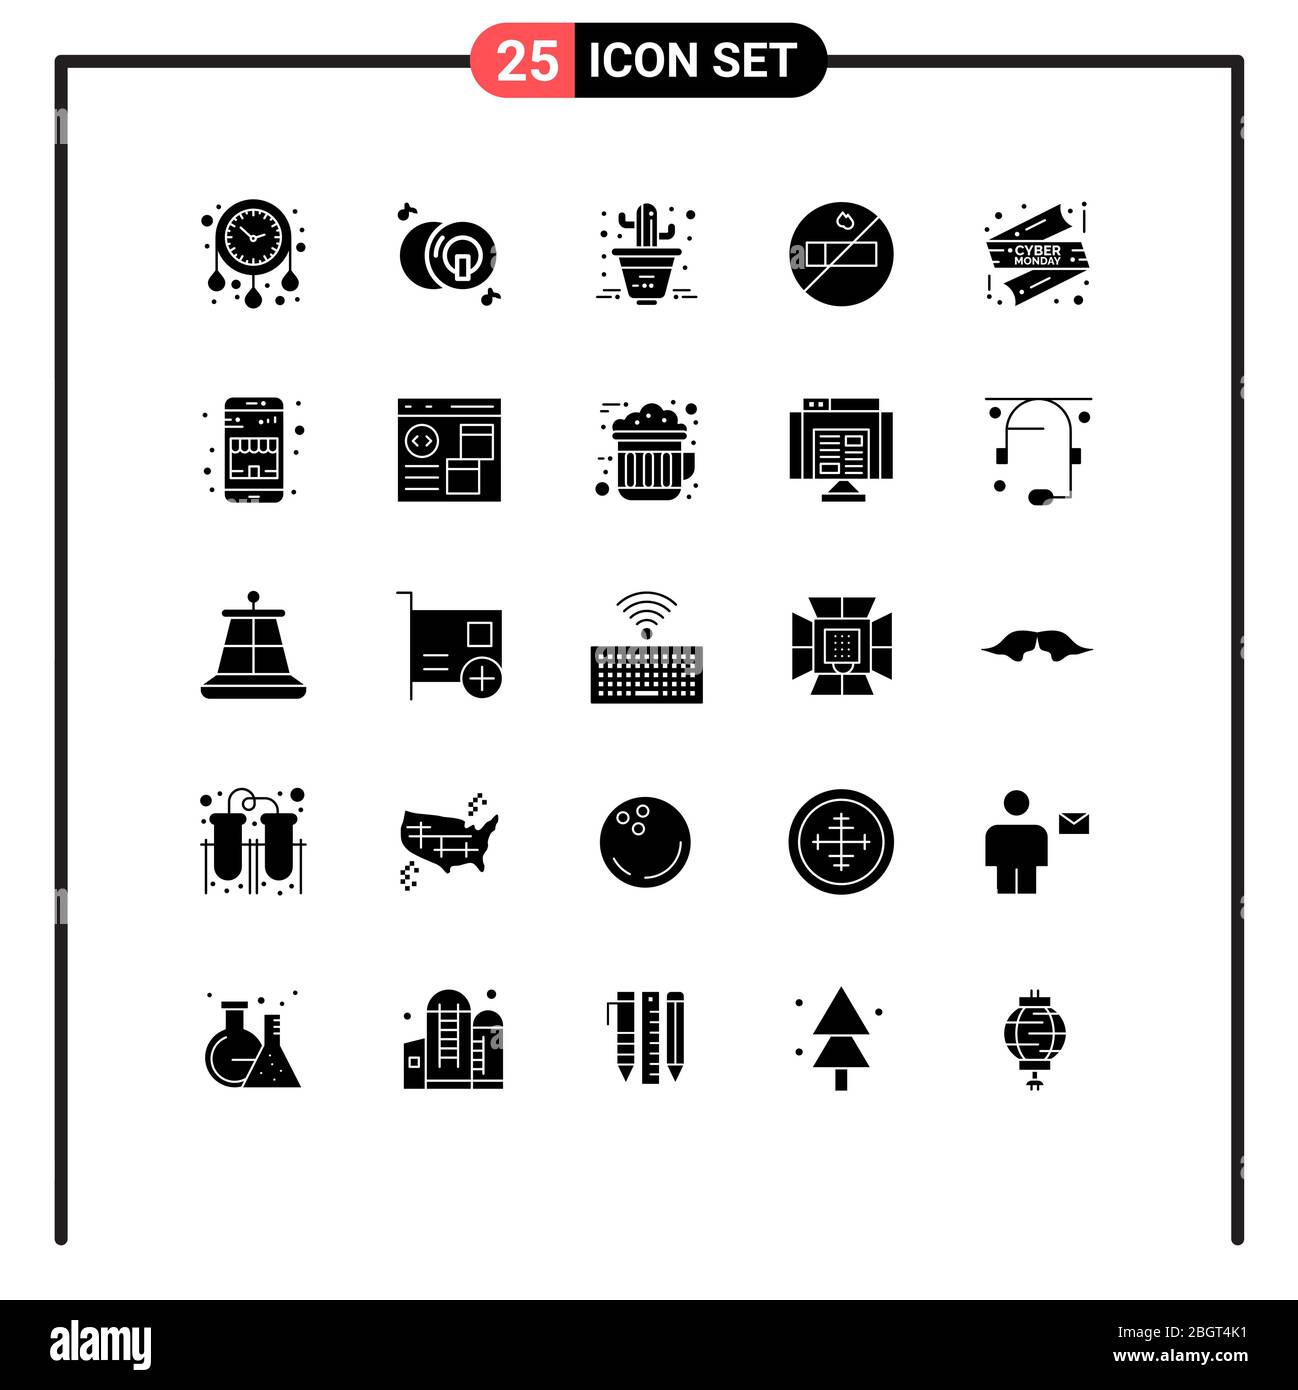 Set of 25 Modern UI Icons Symbols Signs for buy, shop, cactus, sale, smoking Editable Vector Design Elements Stock Vector